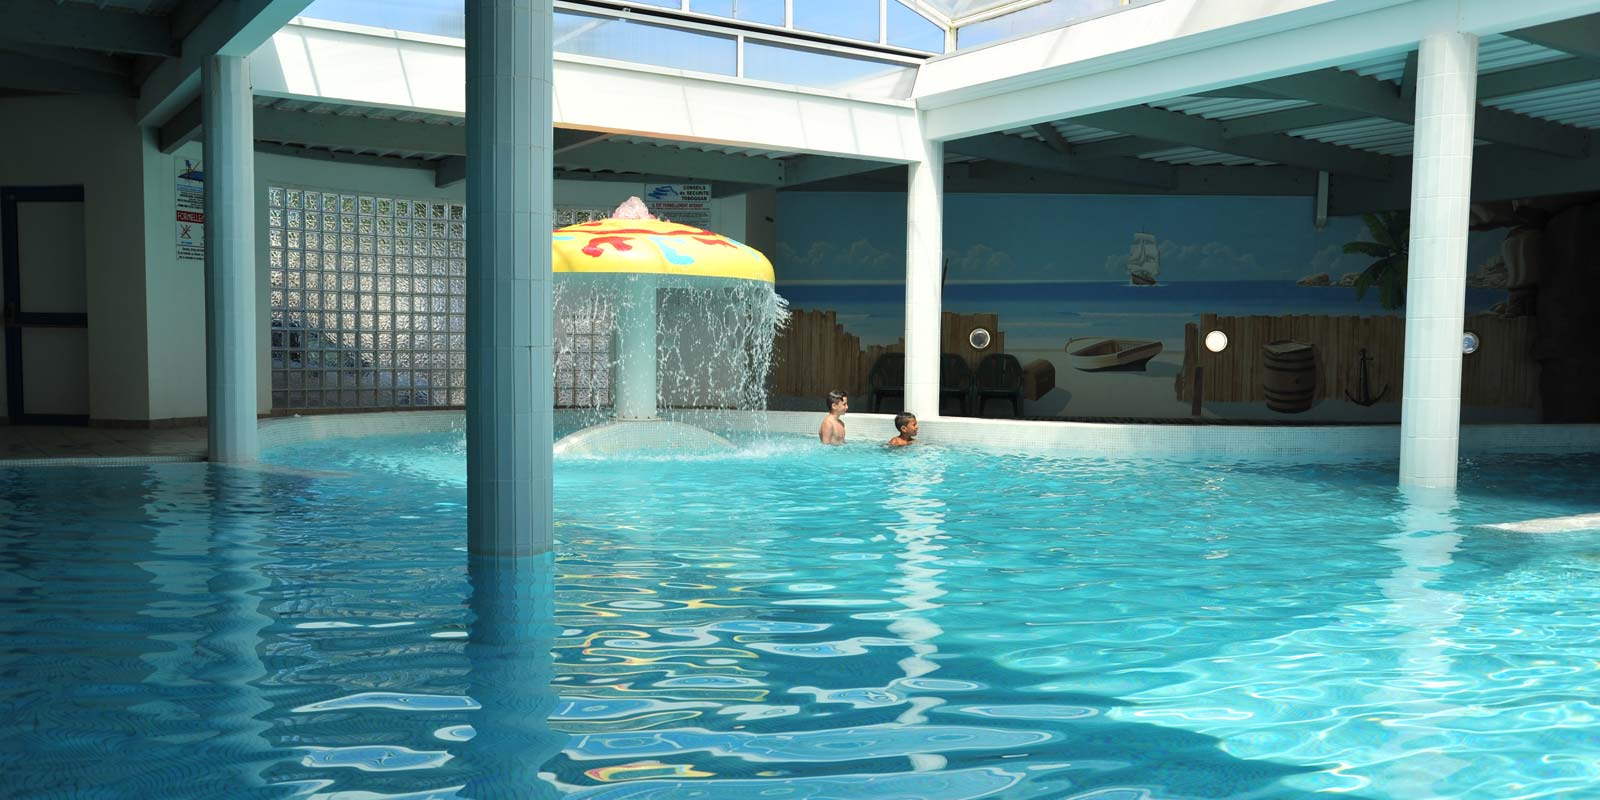 The indoor swimming pool of the Vendée campsite in Saint-Hilaire